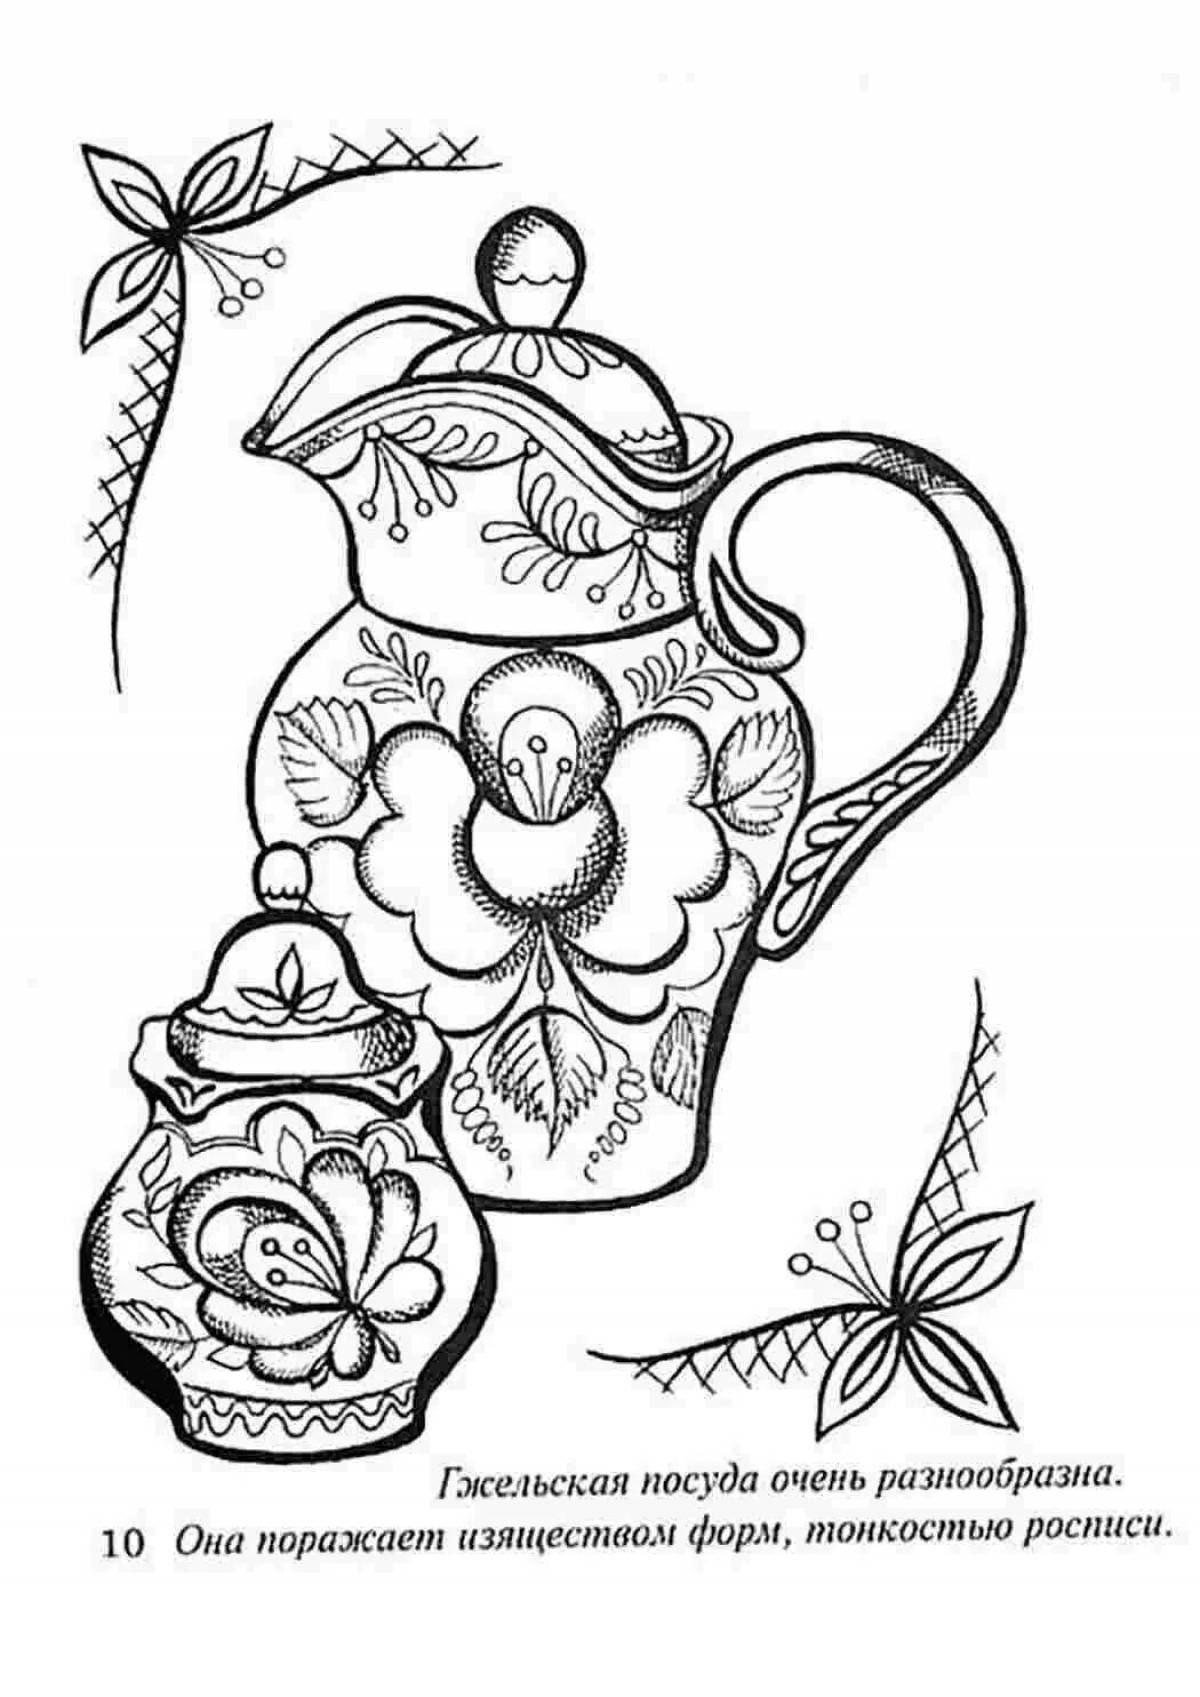 Coloring page bizarre Russian folk crafts